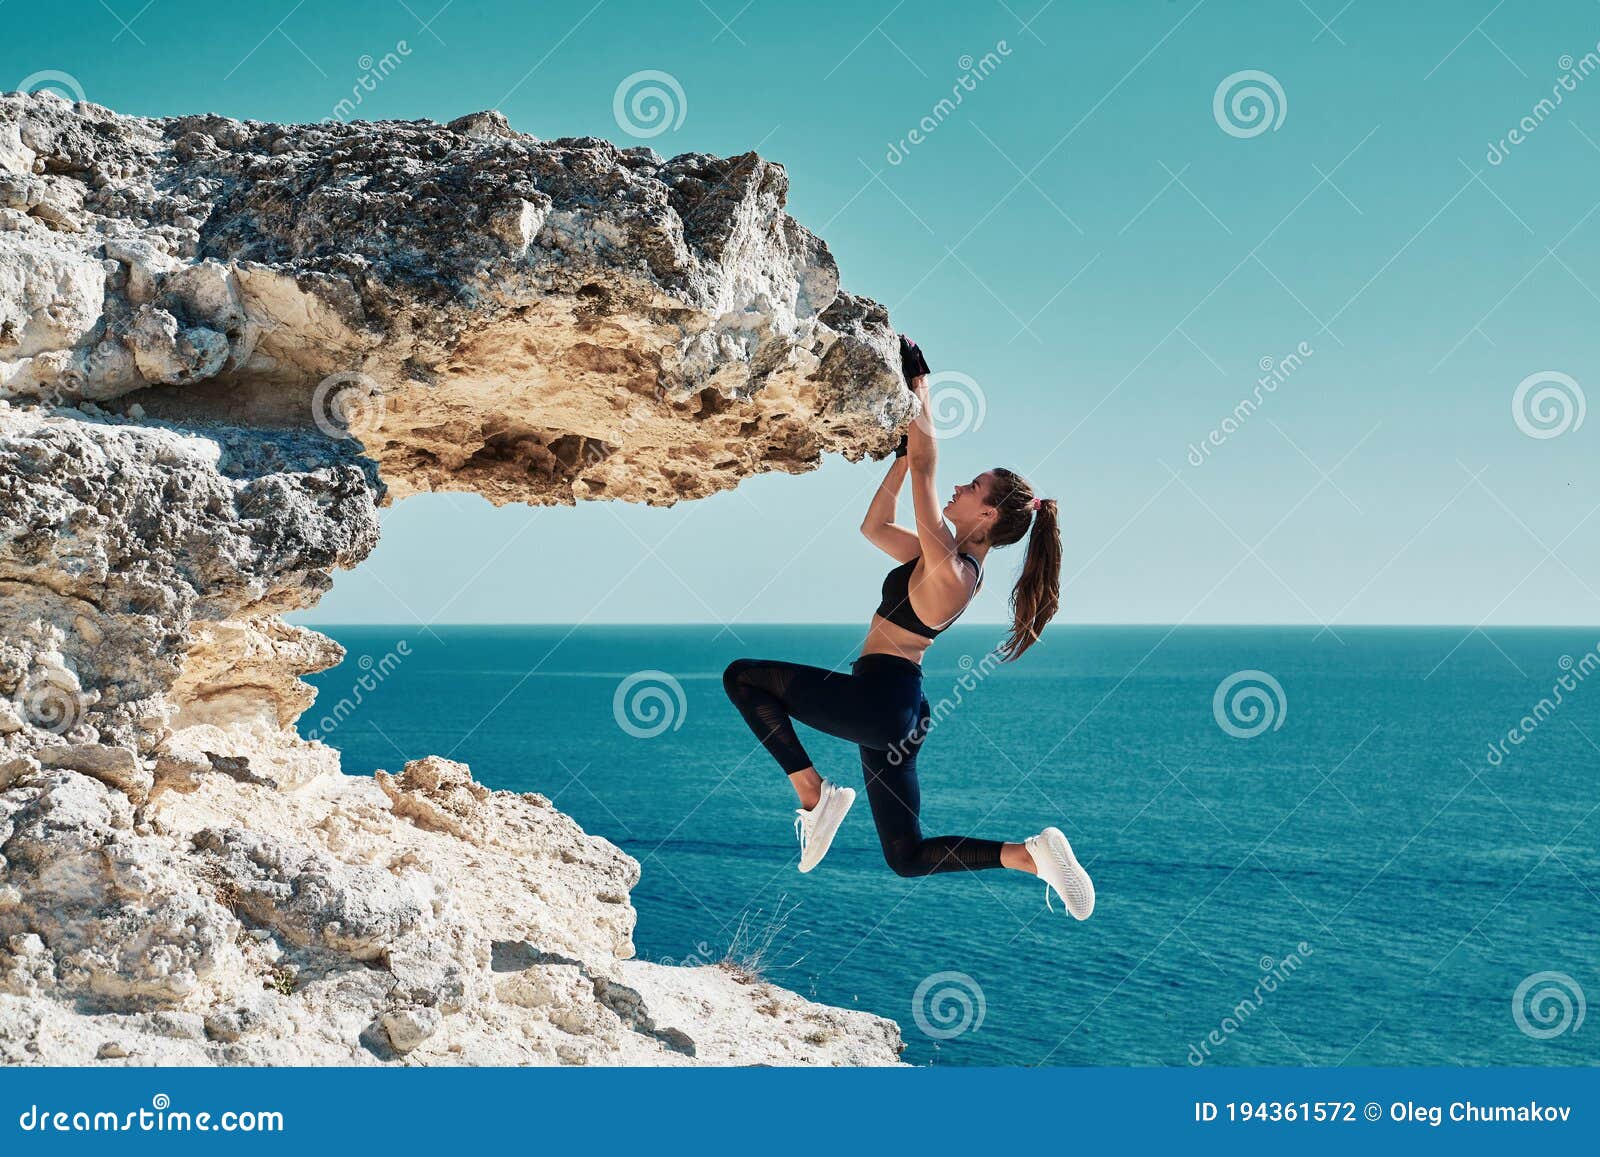 rock climbing. sport. active lifestyle. athlete woman hangs on sharp cliff. seascape. outdoors workout. high resilience